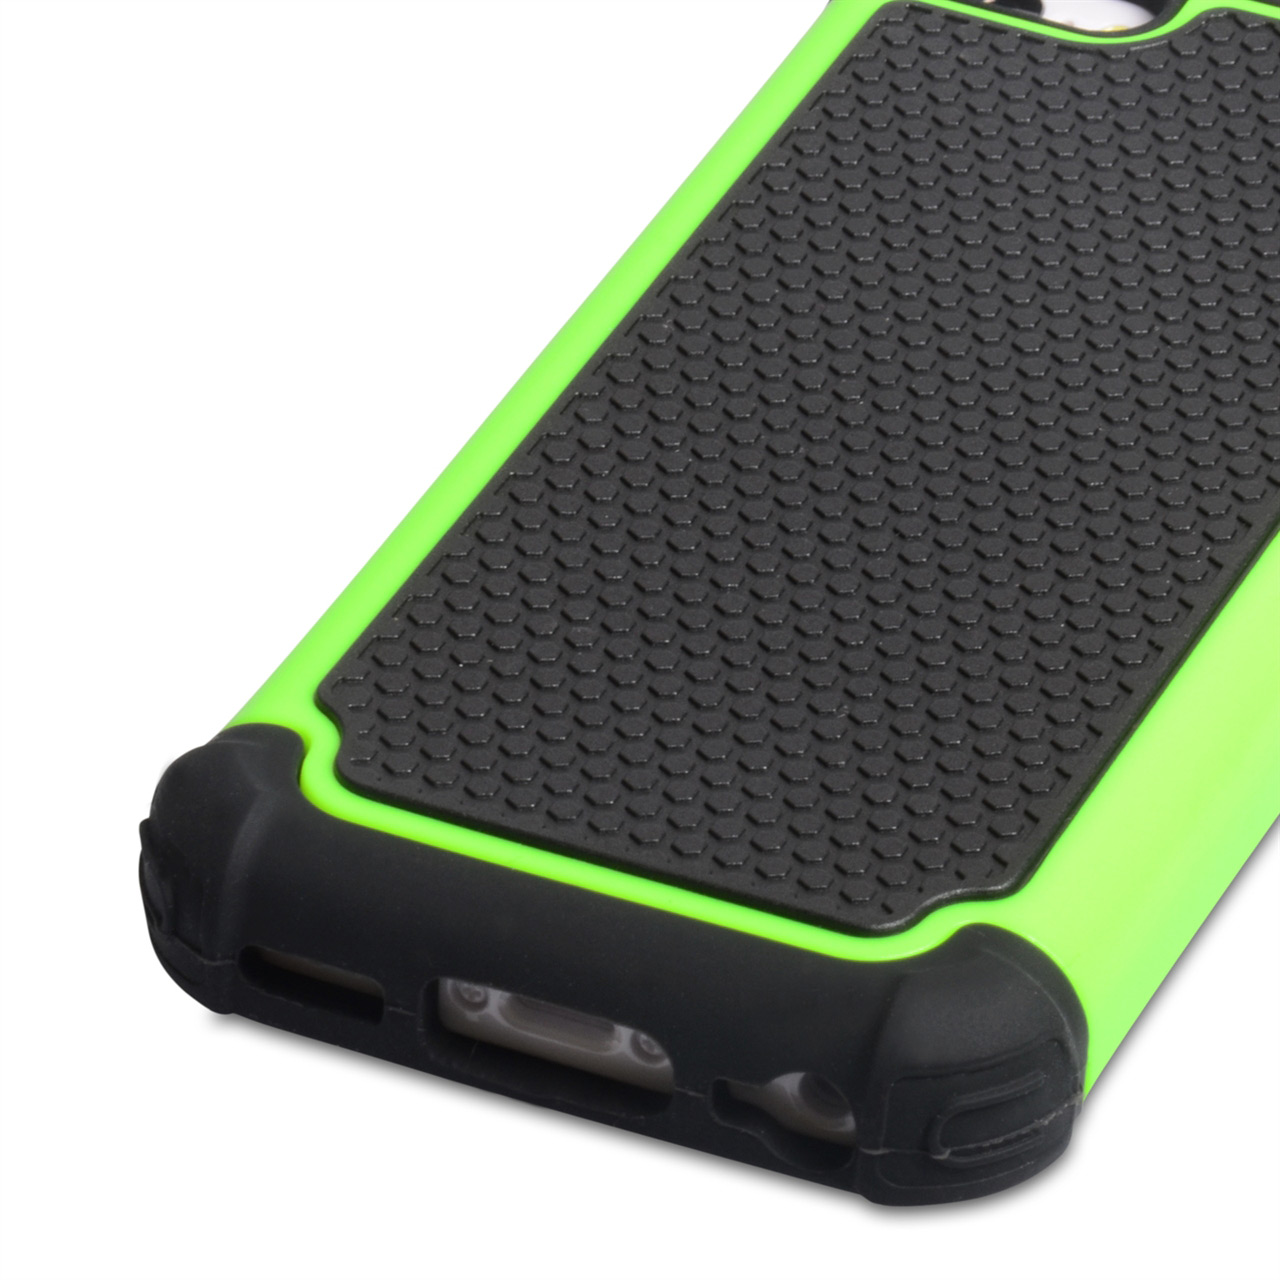 YouSave Accessories iPhone 5C Grip Combo Case - Green